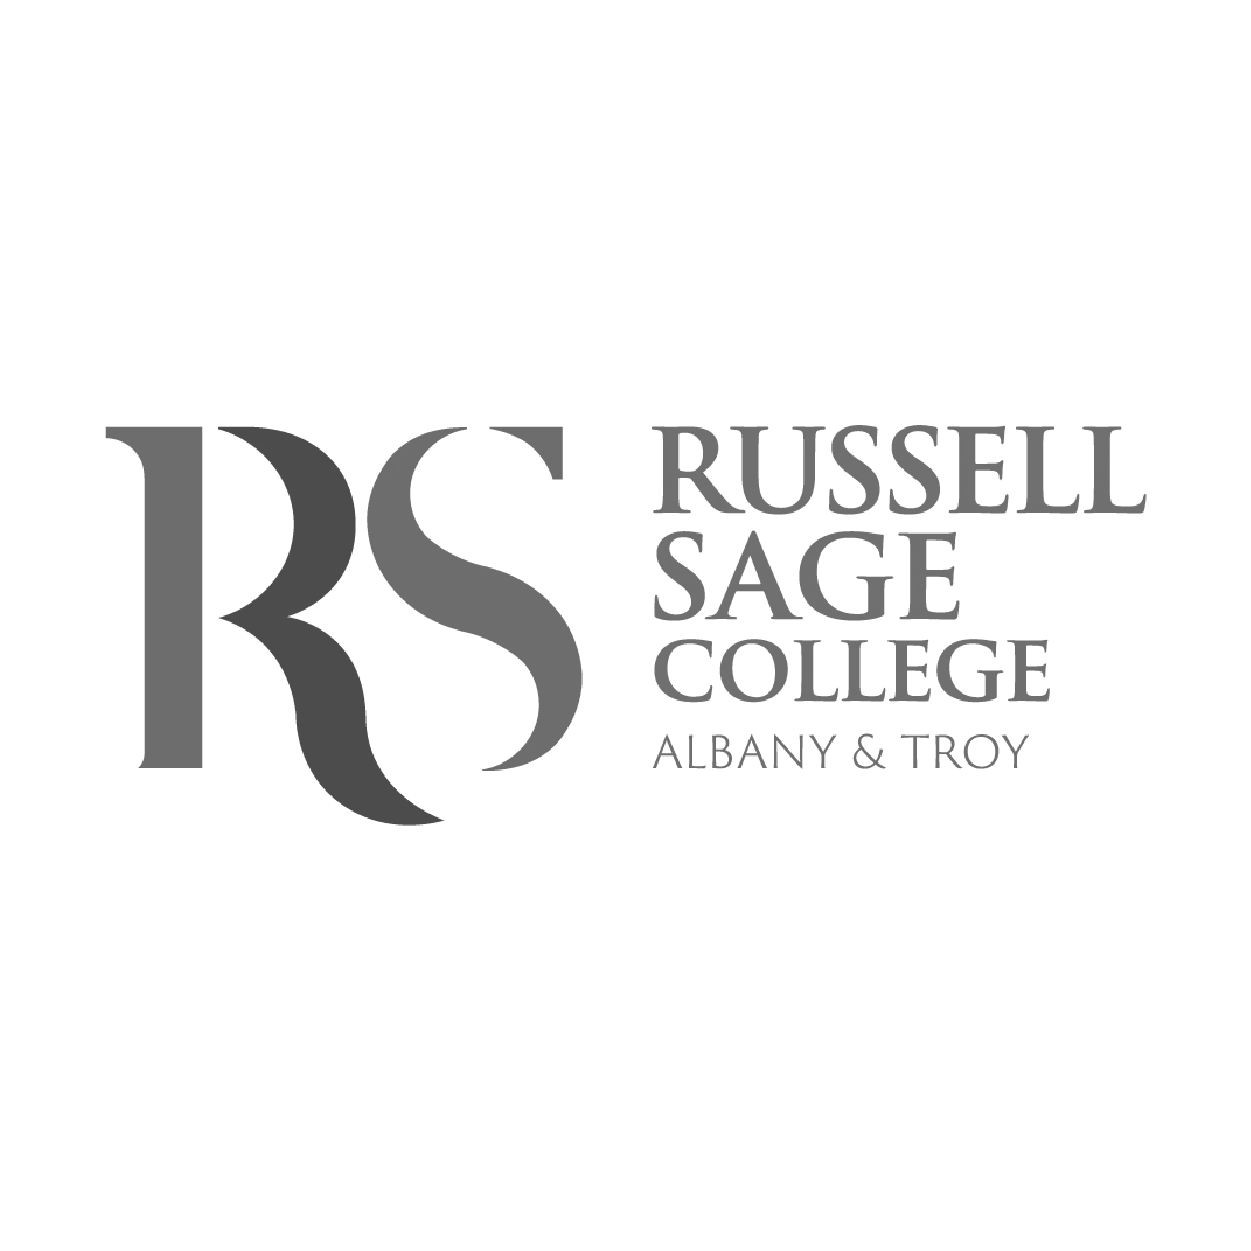 Russell Sage College